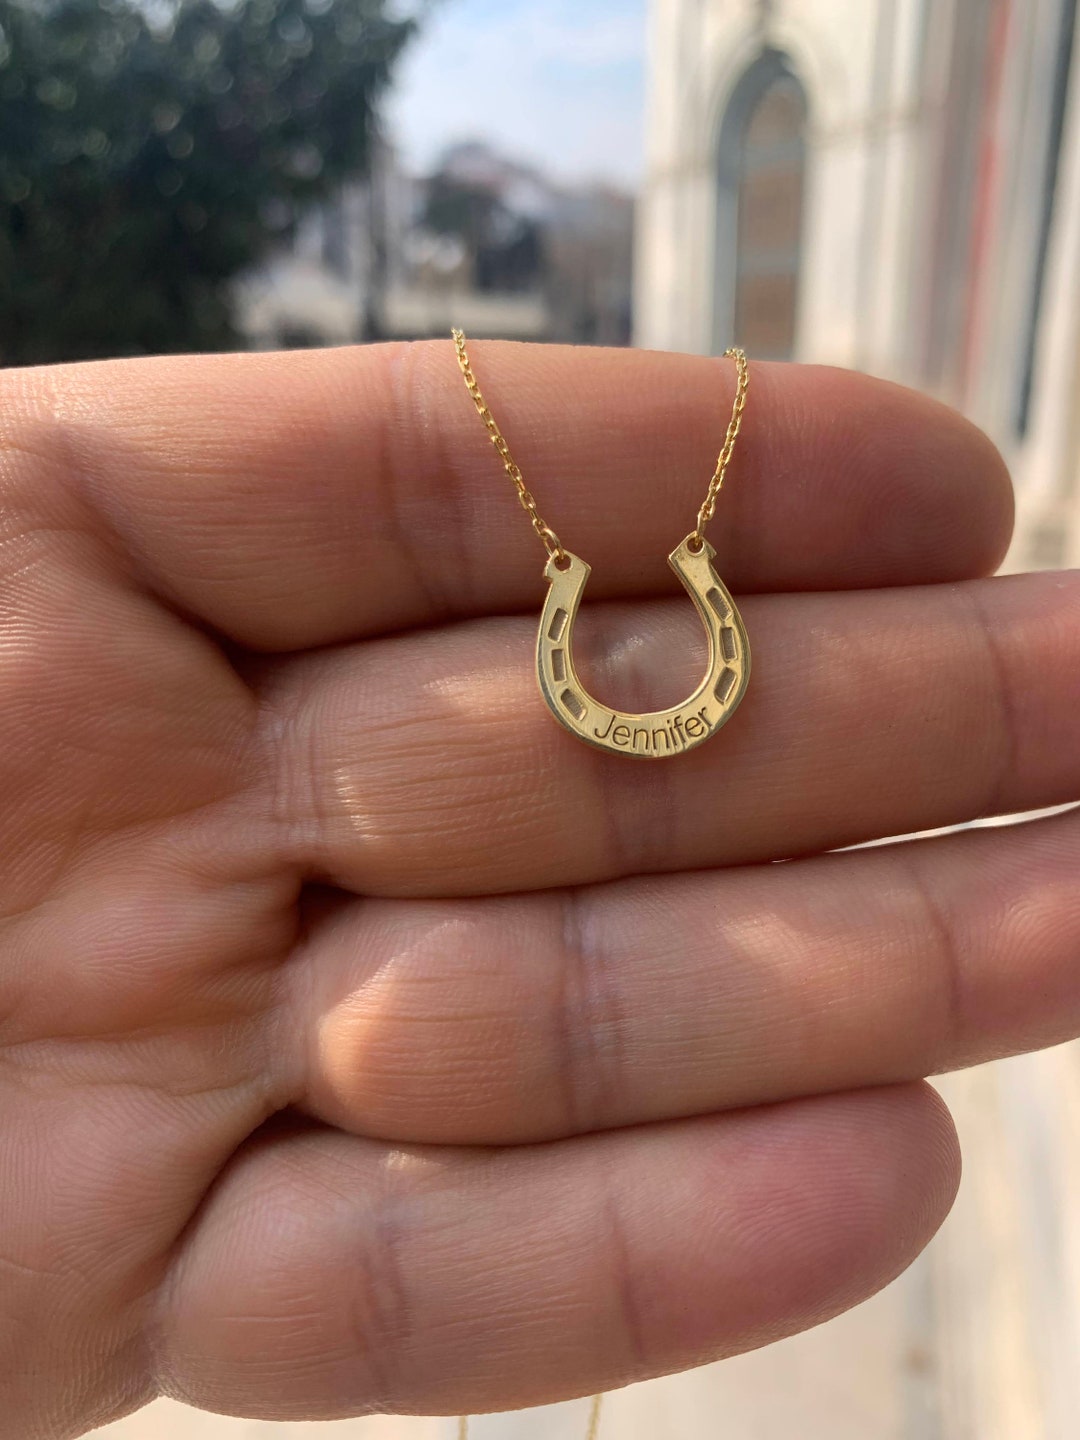 Horseshoe Pendant Necklace Solid 14K Real Gold Good Women Luck Charm Rope  Chain | eBay